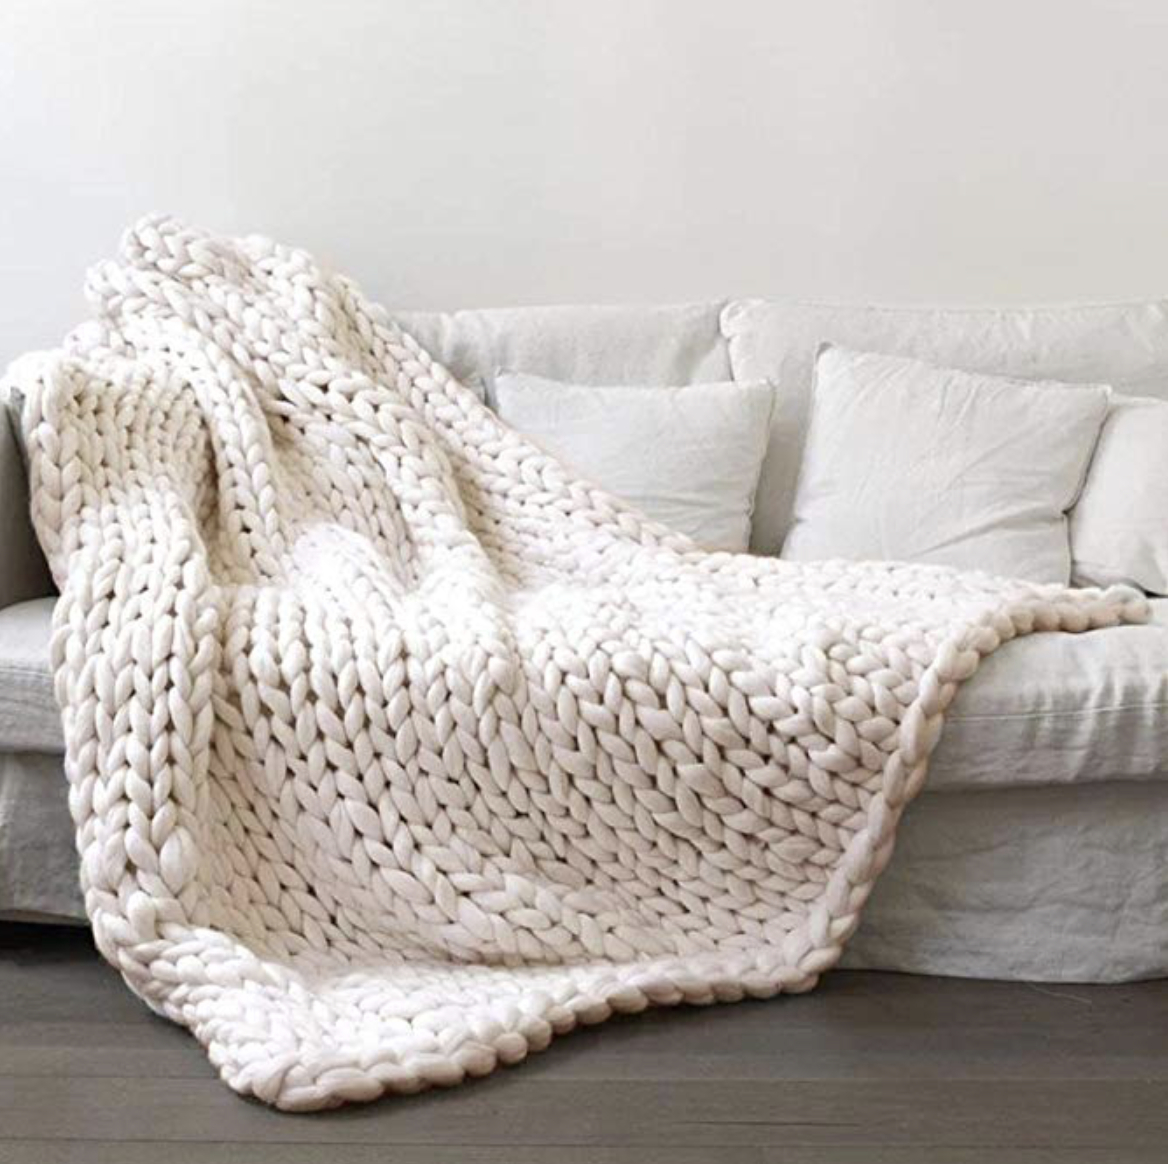 Hand Knitted Throw Patterns Winter Warm Hand Knitted Throw Blanket The Pickled Rose